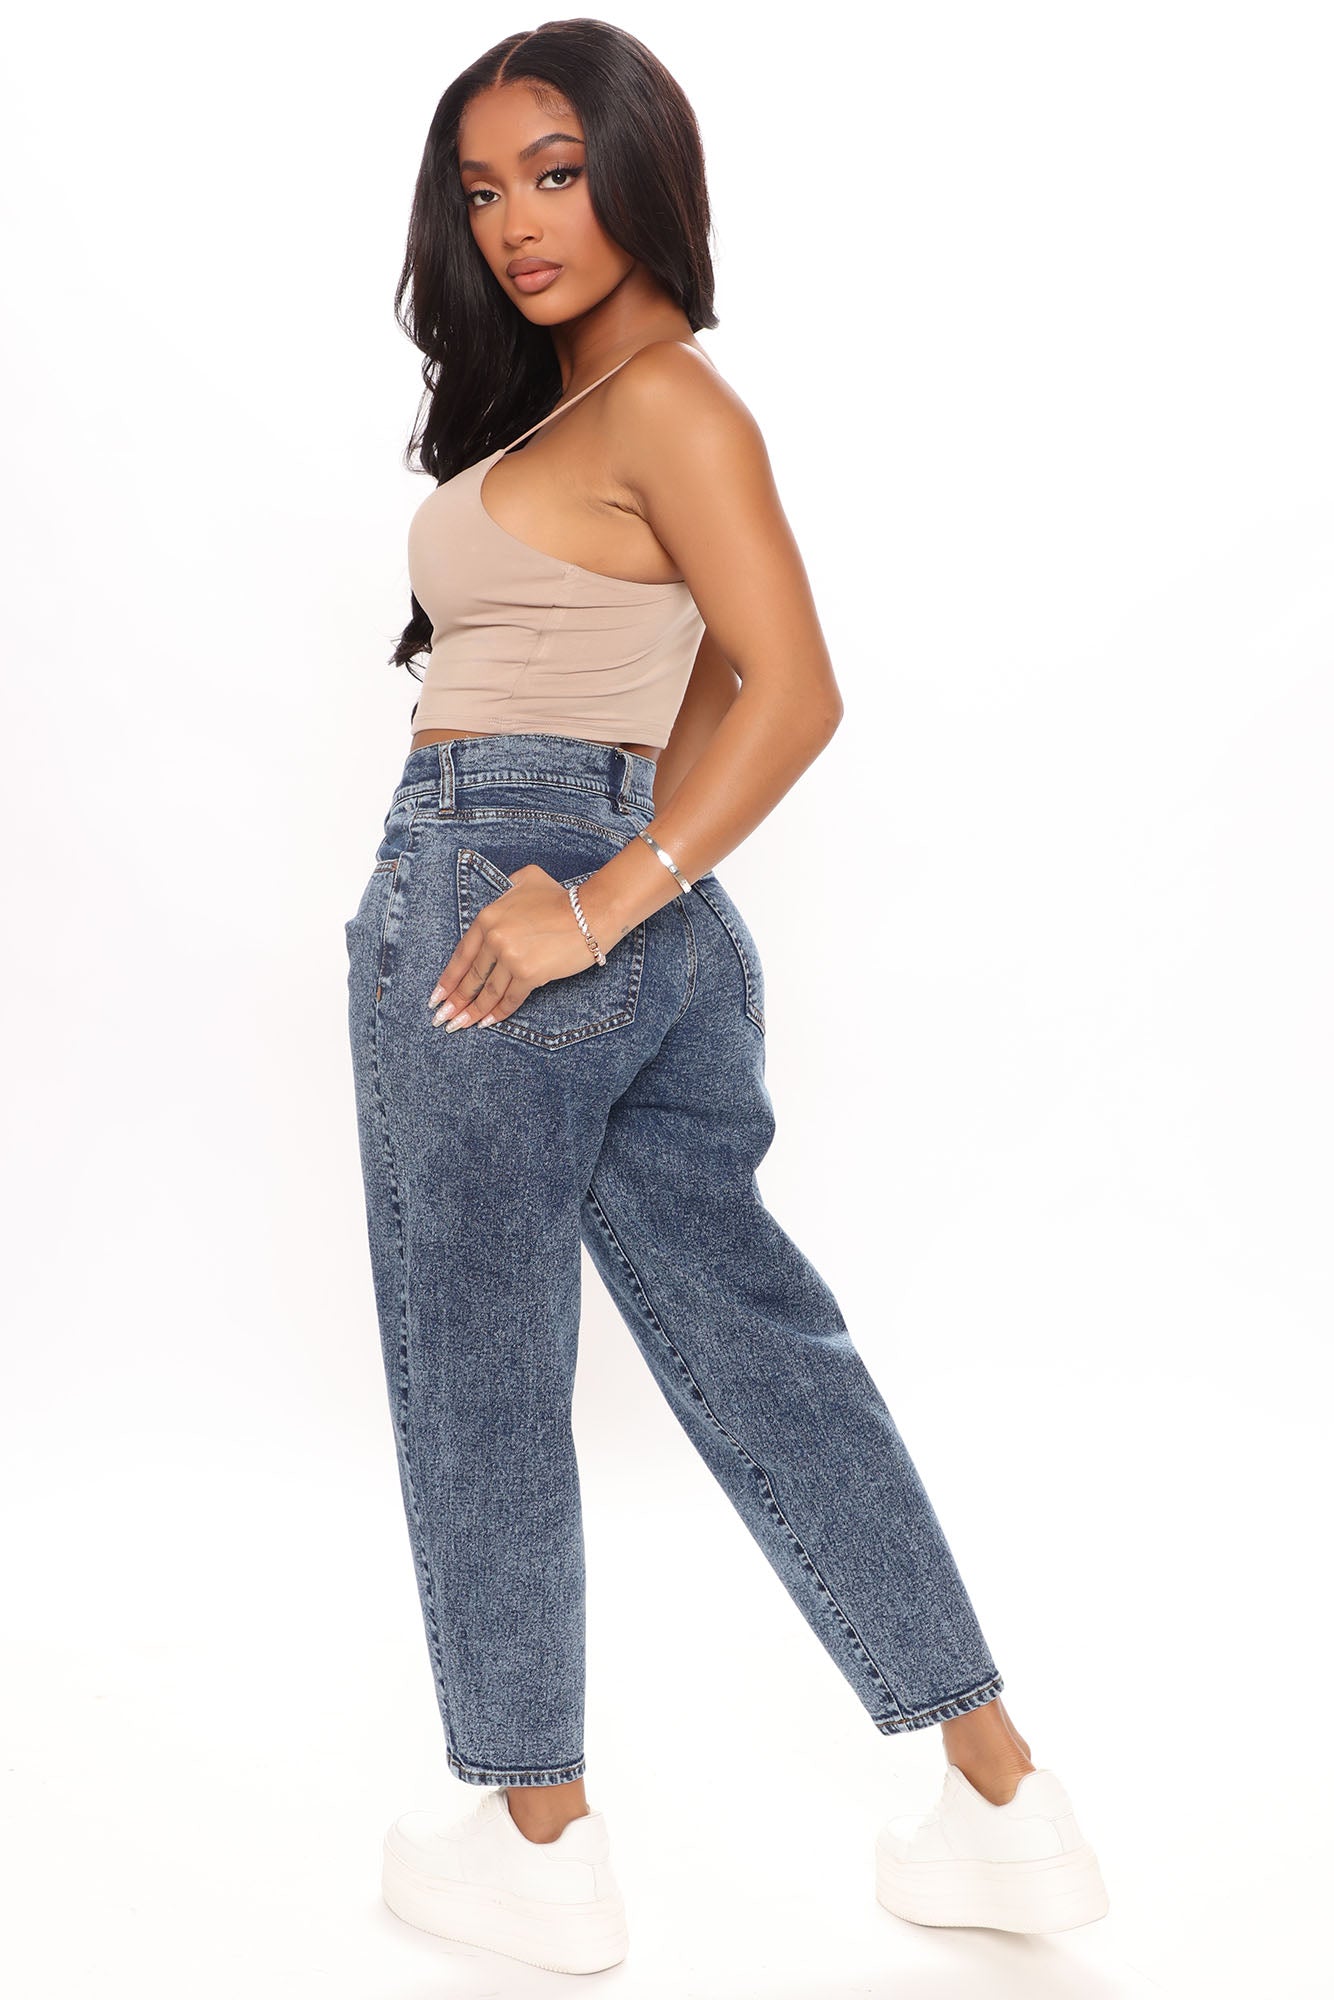 Living My Best Life Tapered Mom Jeans - Dark Wash